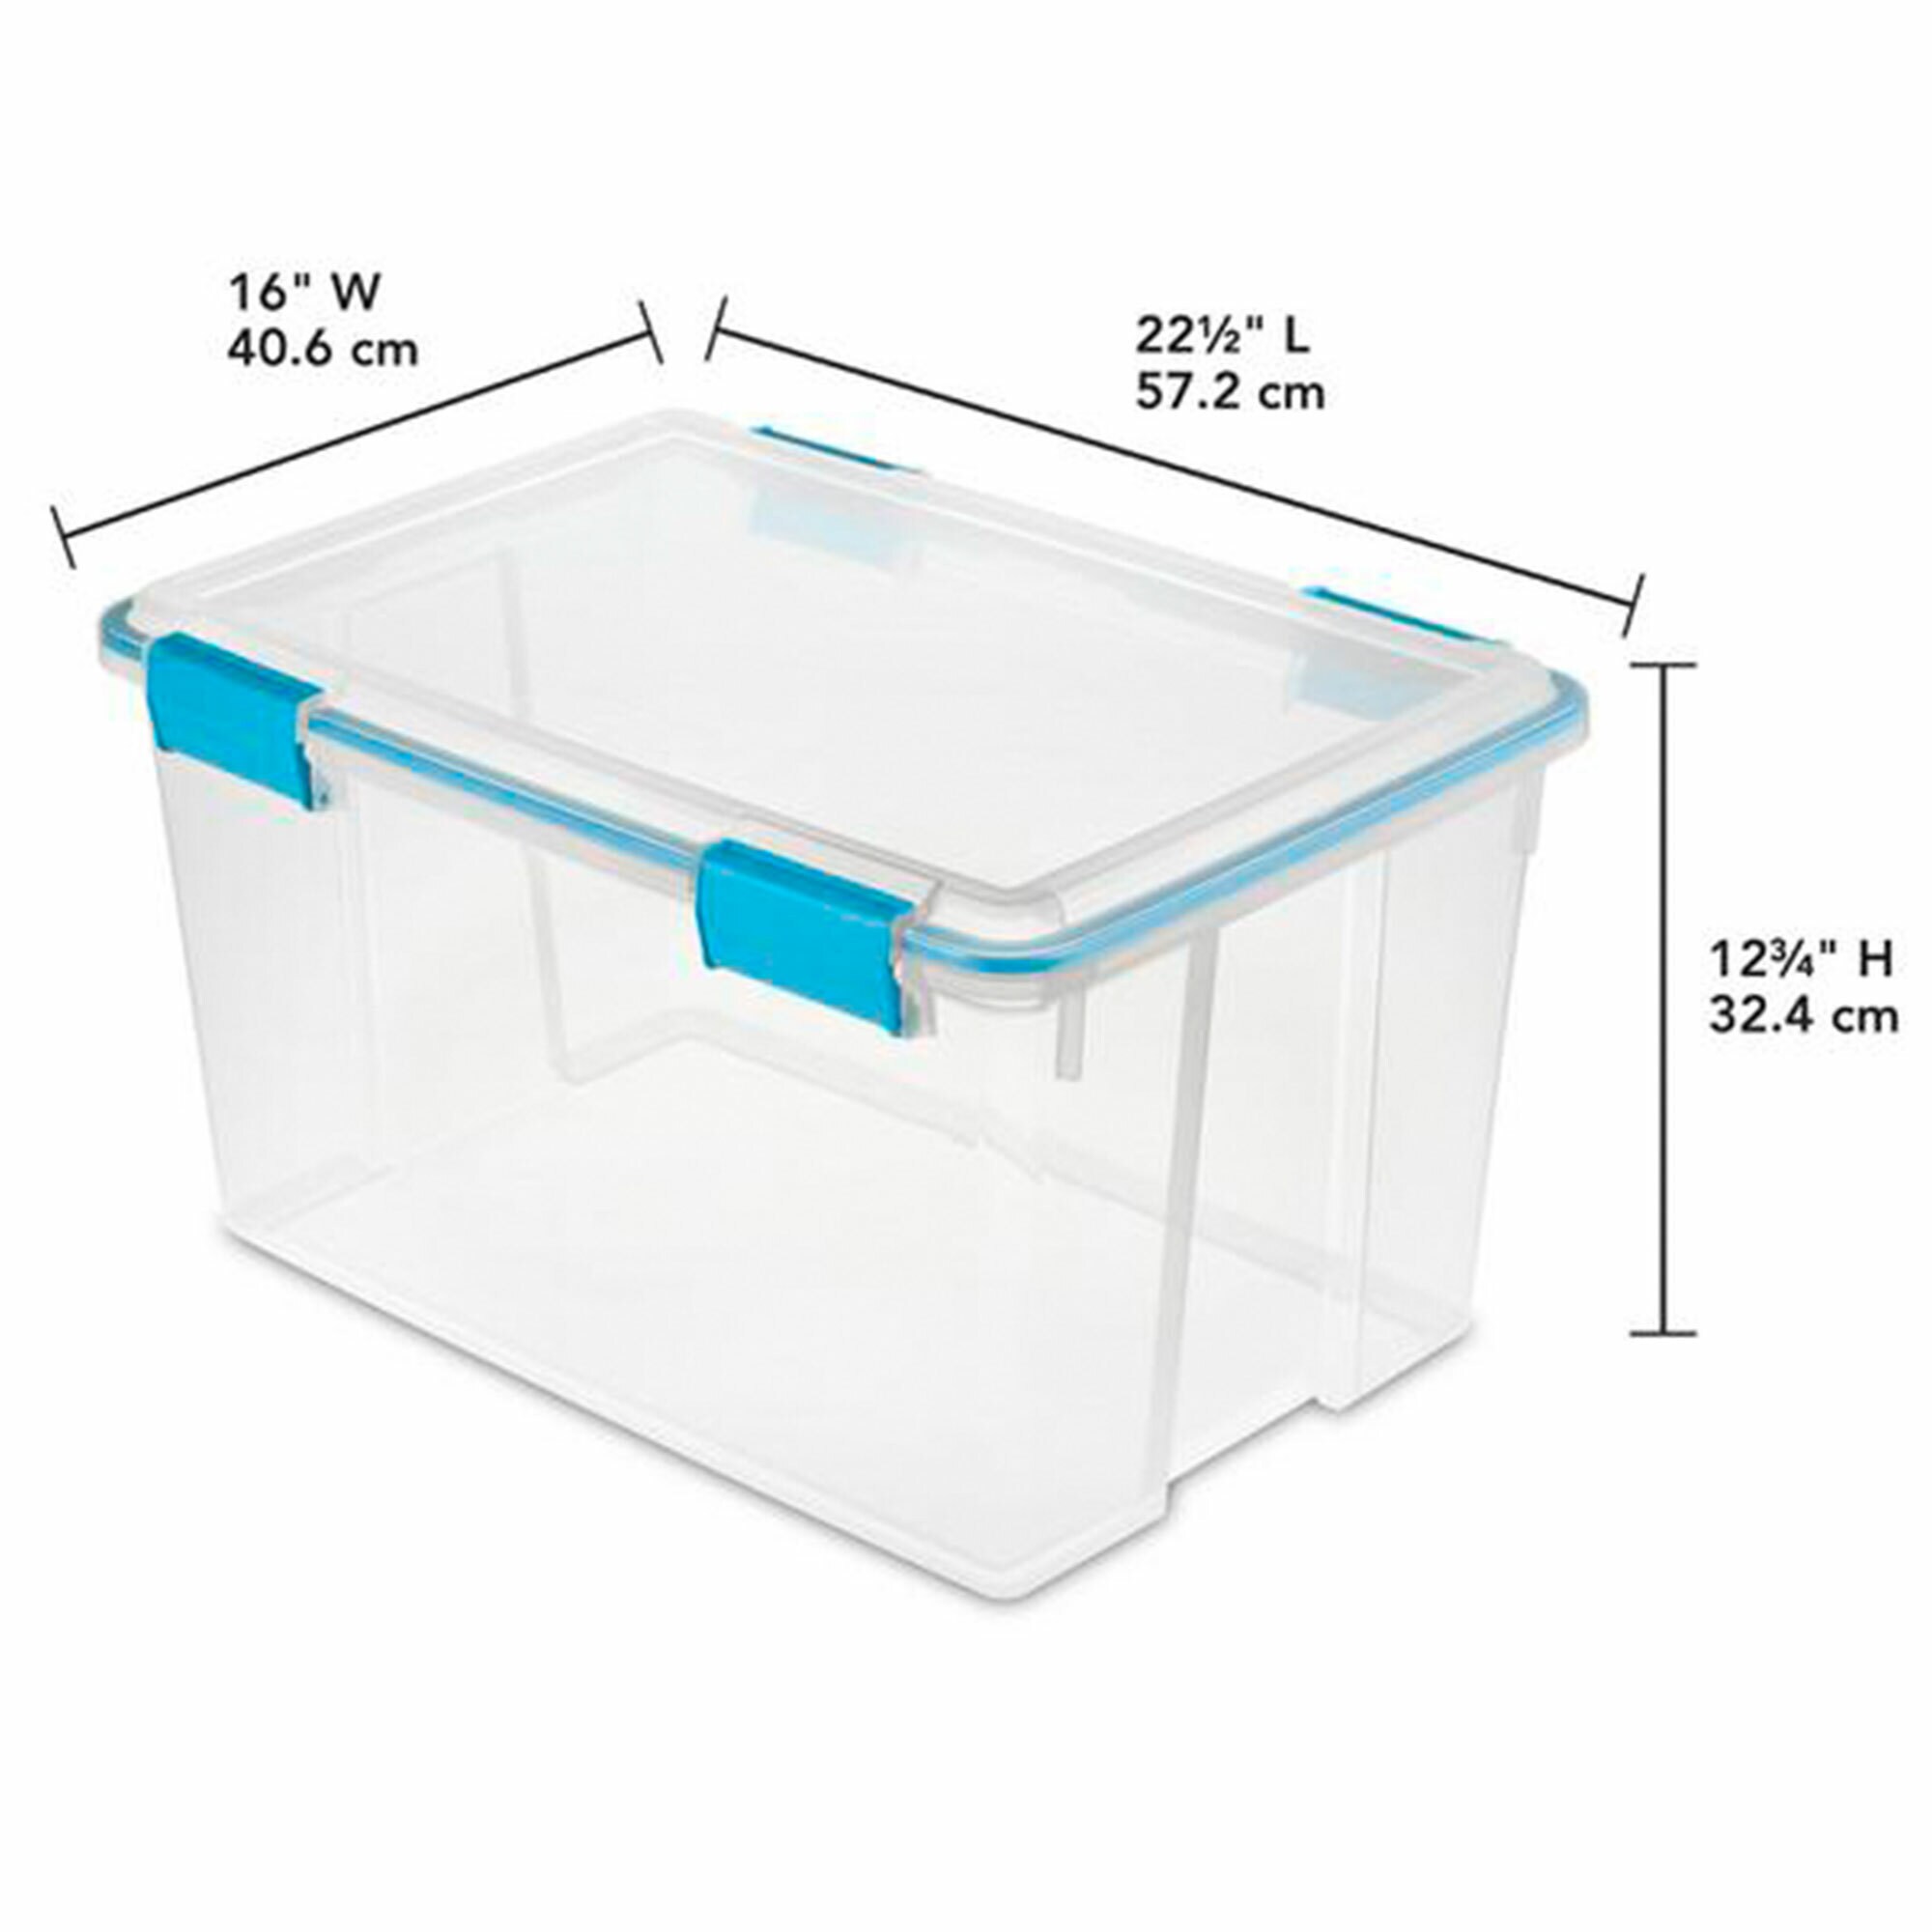 Best Buy: Sterilite Gasket Box with Clear Base and Lid (8 Pack) 8